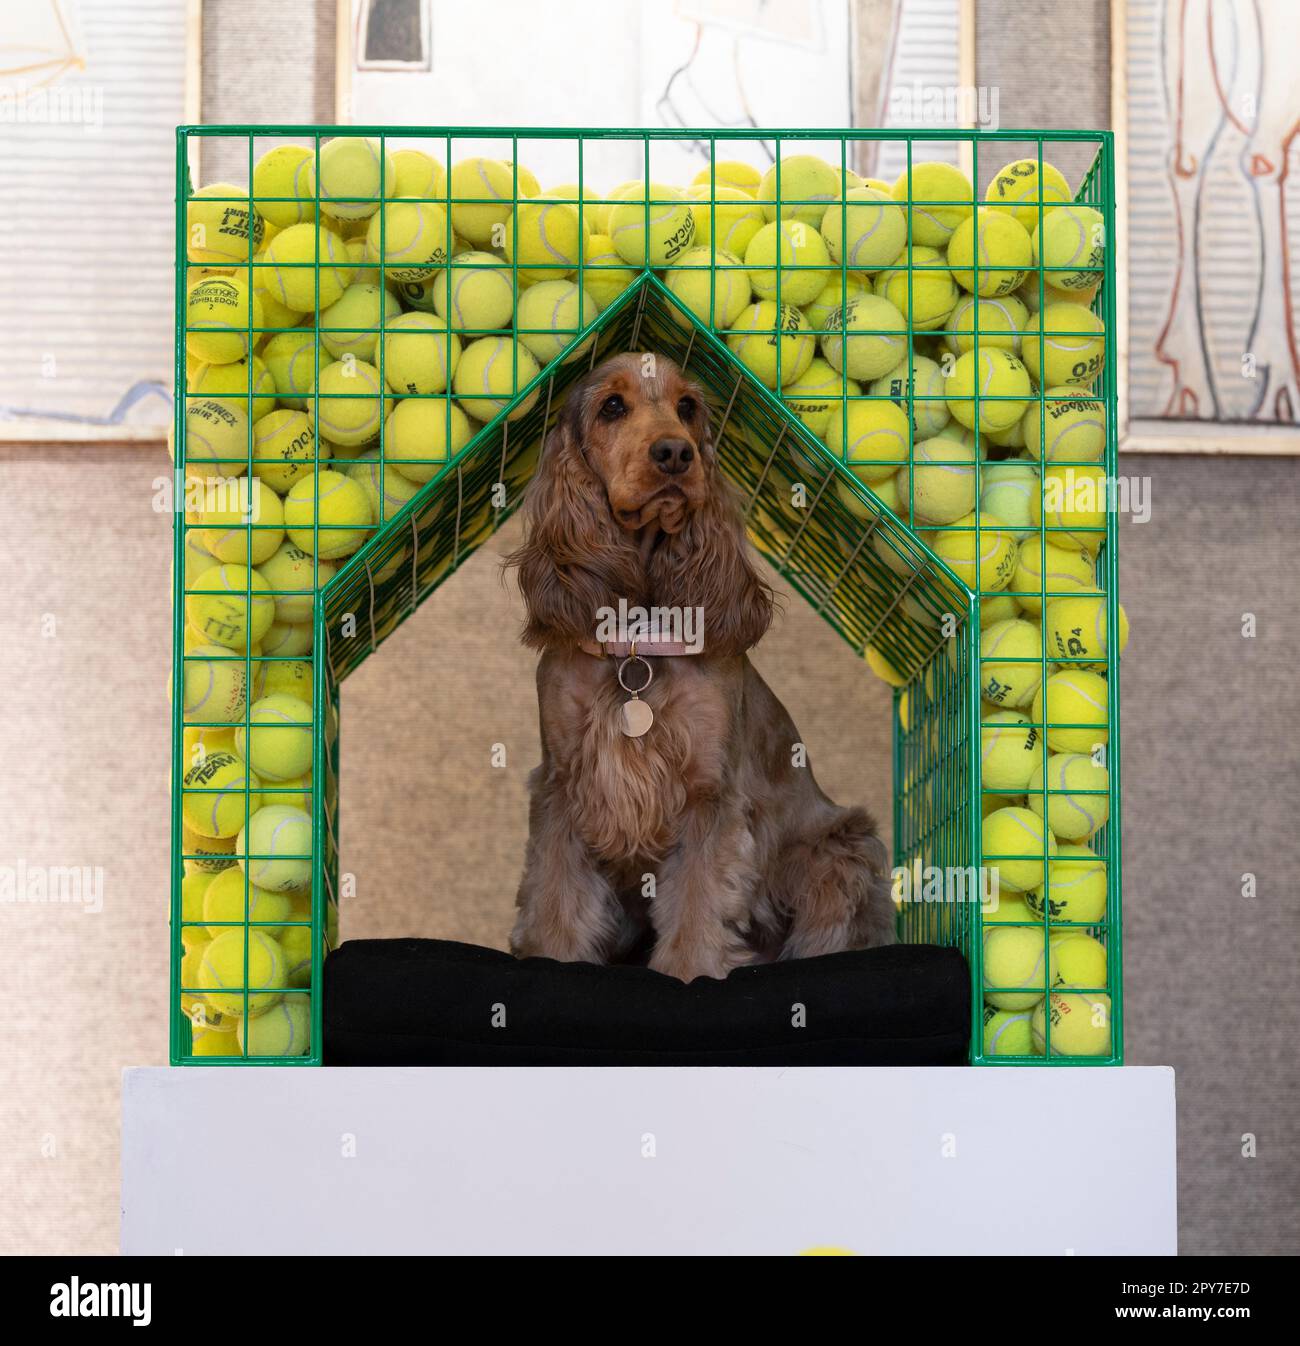 Bonhams, London, UK. 3 May 2023. Photocall for selected highlights from Goodwoof's Barkitecture kennel design competition 2023. Britain's leading kennel design competition is back for 2023. The brainchild of Kevin McCloud MBE & The Duke of Richmond, Barkitecture is a unique competition celebrating best kennel architecture. Competing for the ‘Kennel Design Award', registered architects had a choice of designing a single or double occupancy kennel, for dogs at work, with a £250 budget. Shortlisted kennels include: Coffey Architects Fetch, modelled with Spaniel Ludo. Credit: Malcolm Park/Alamy Li Stock Photo